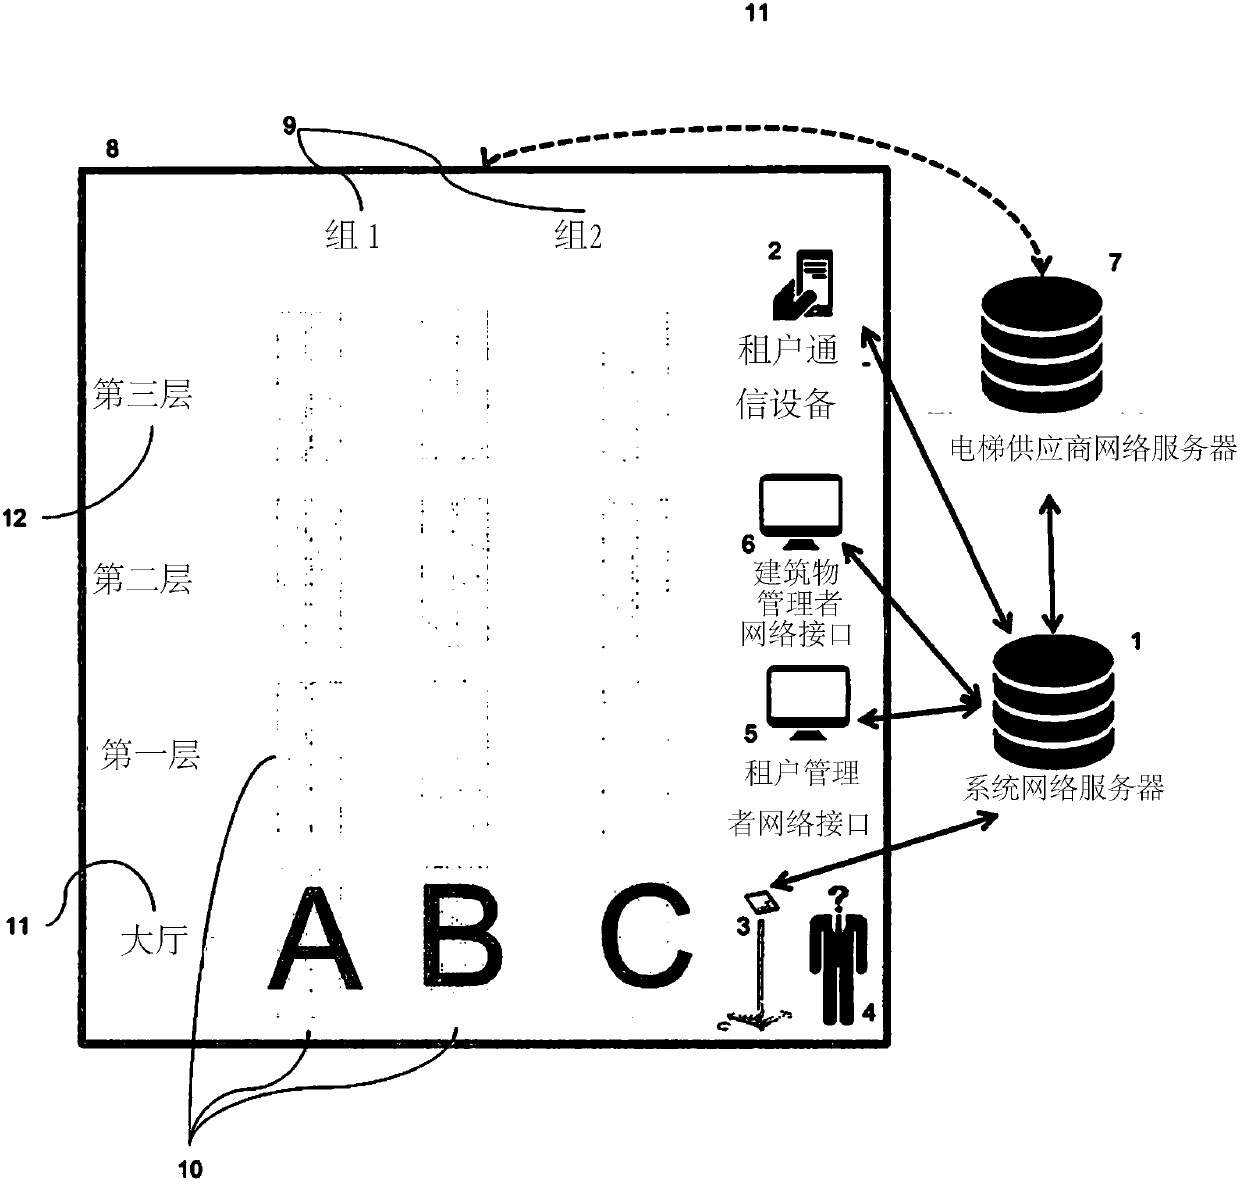 Method and system for mobile visitor identification and selectively allowing automated elevator usage to destinations selected by tenant